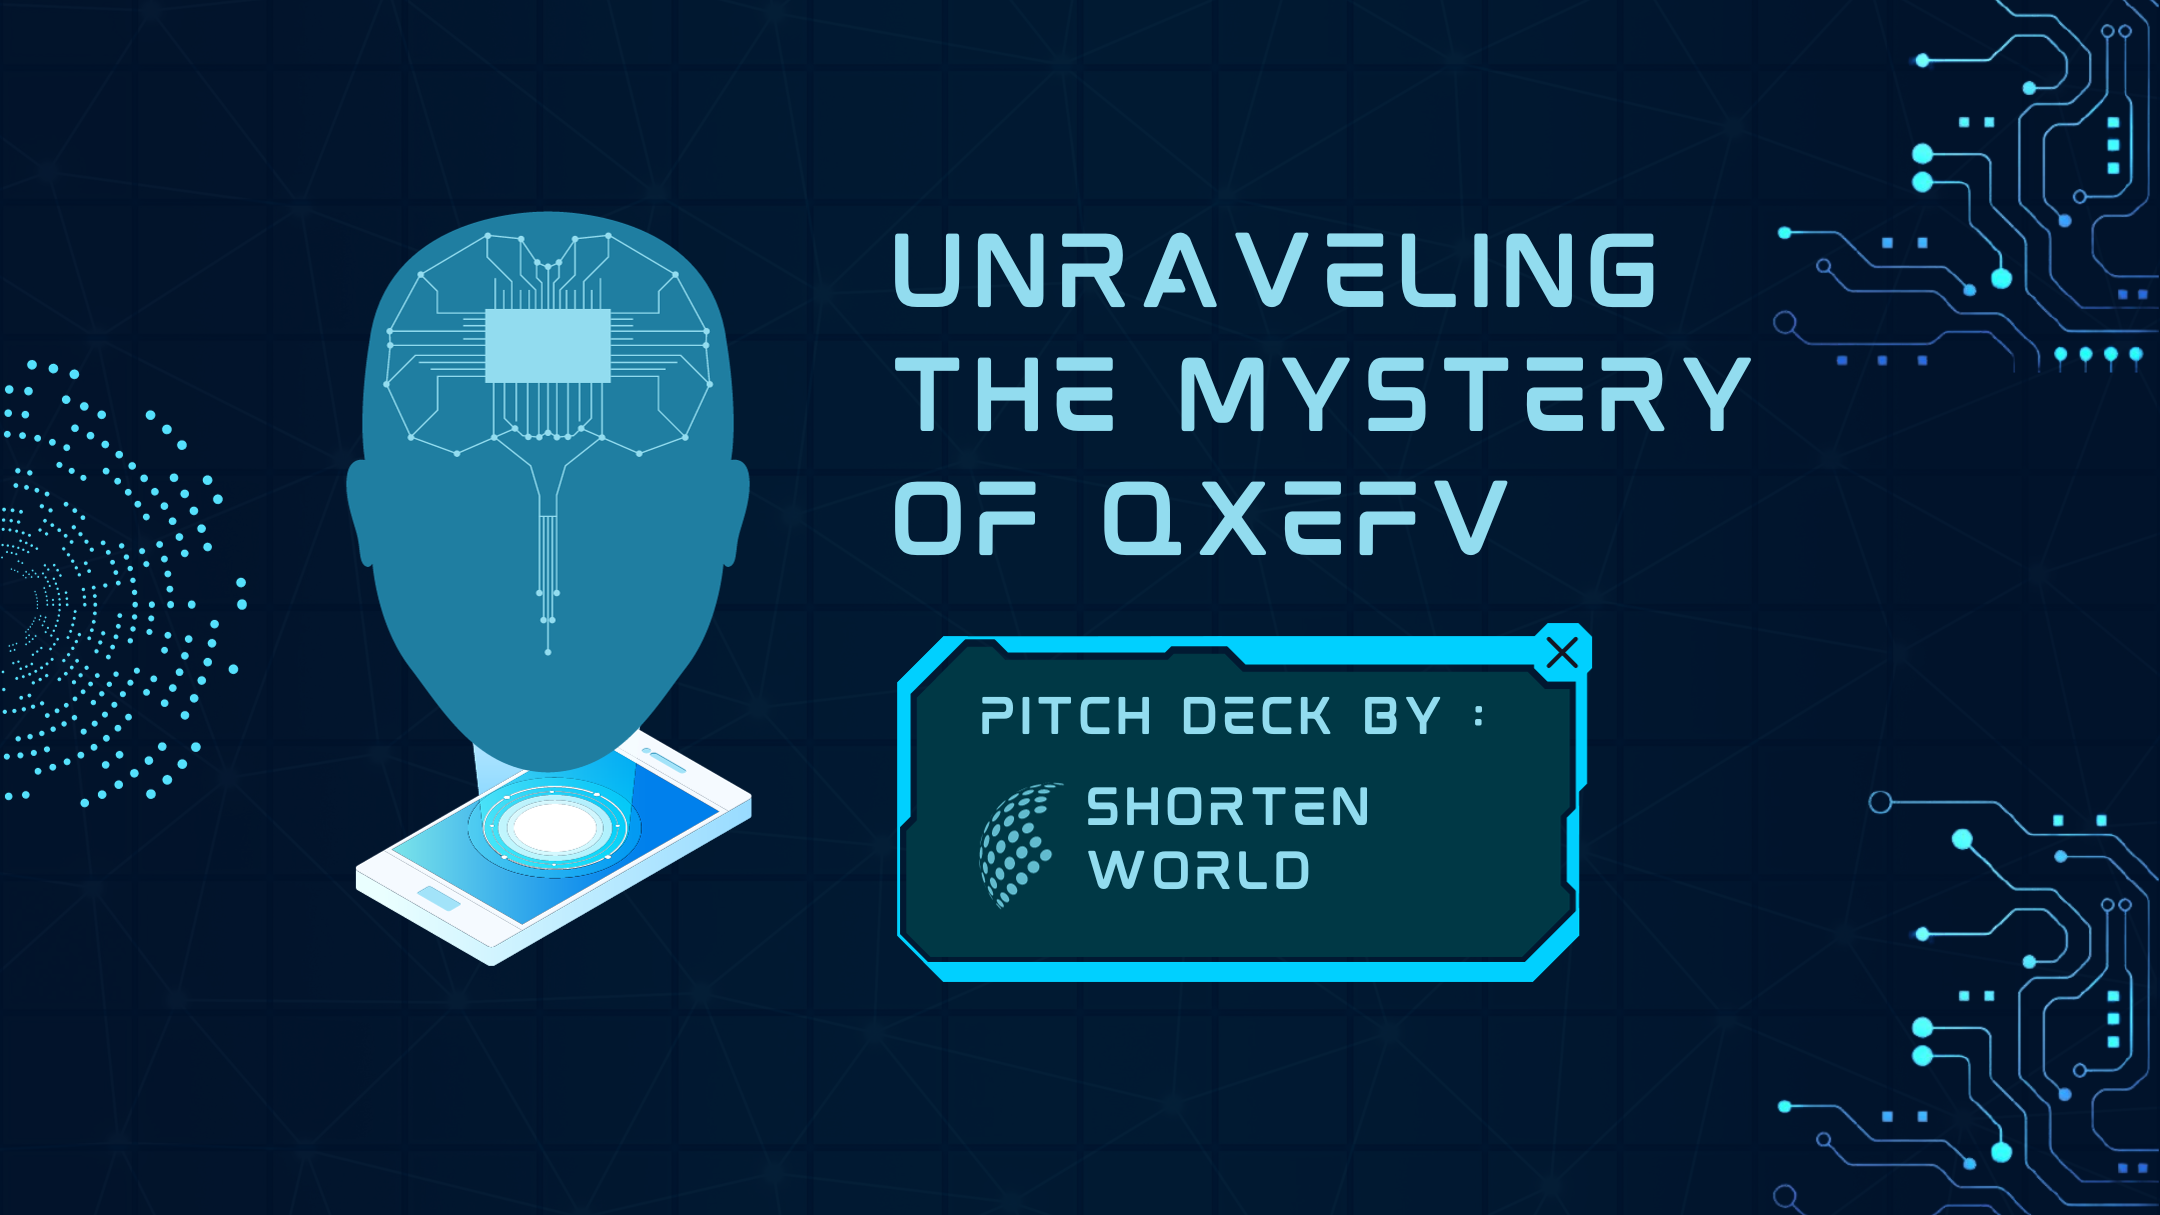 QXEFV: Unraveling the Mystery of QXEFV - A Deep Dive into Cryptic Codes